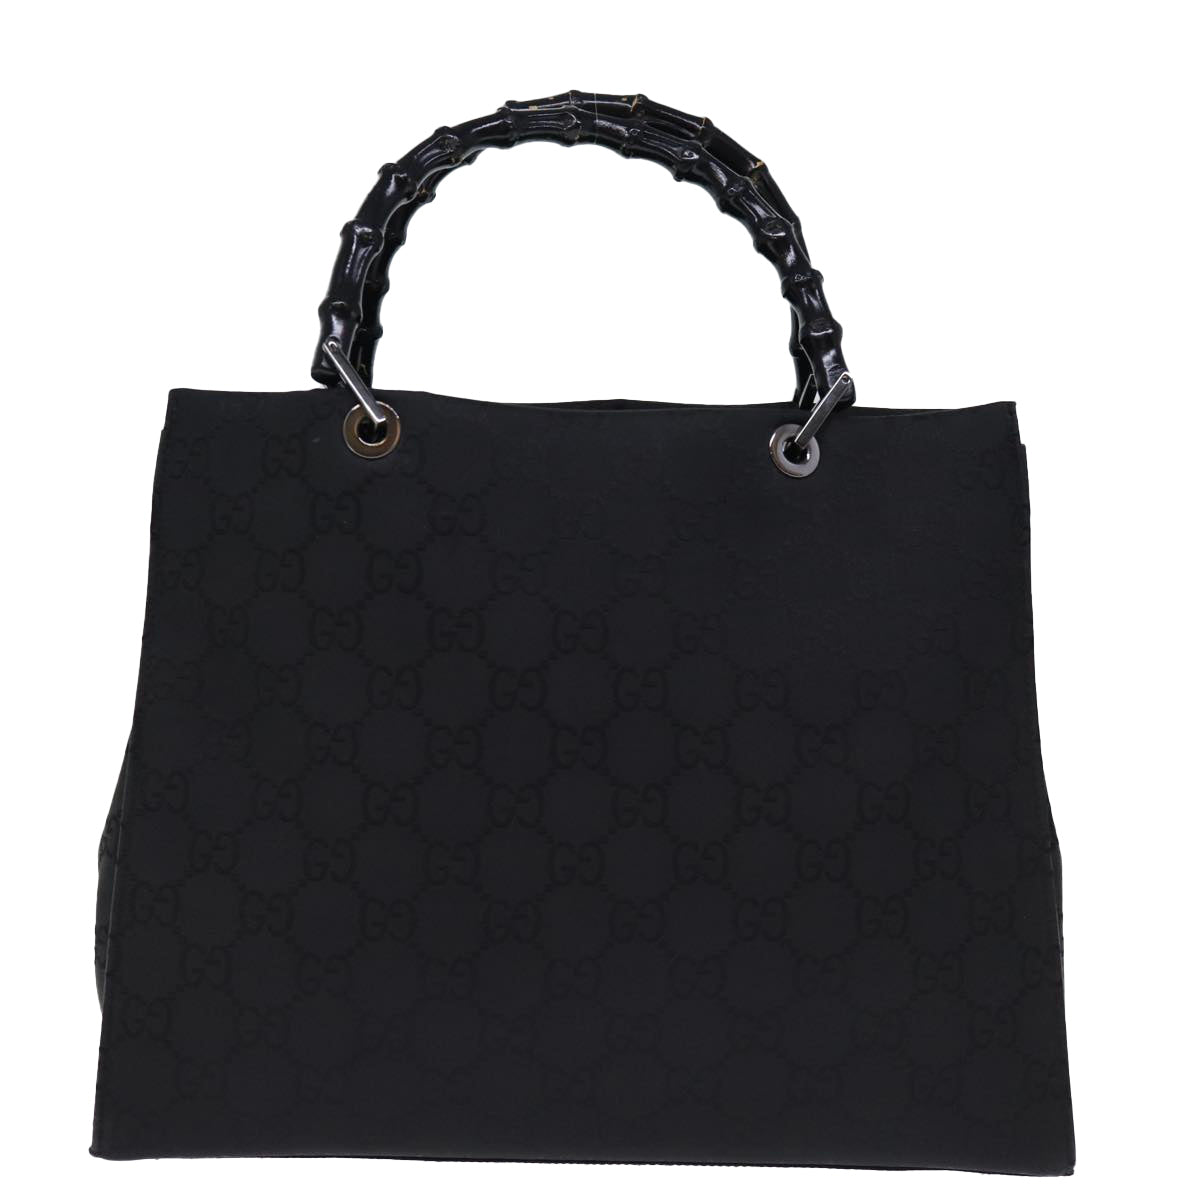 GUCCI Bamboo GG Canvas Hand Bag Black 002 1010 Auth yk12489 - 0